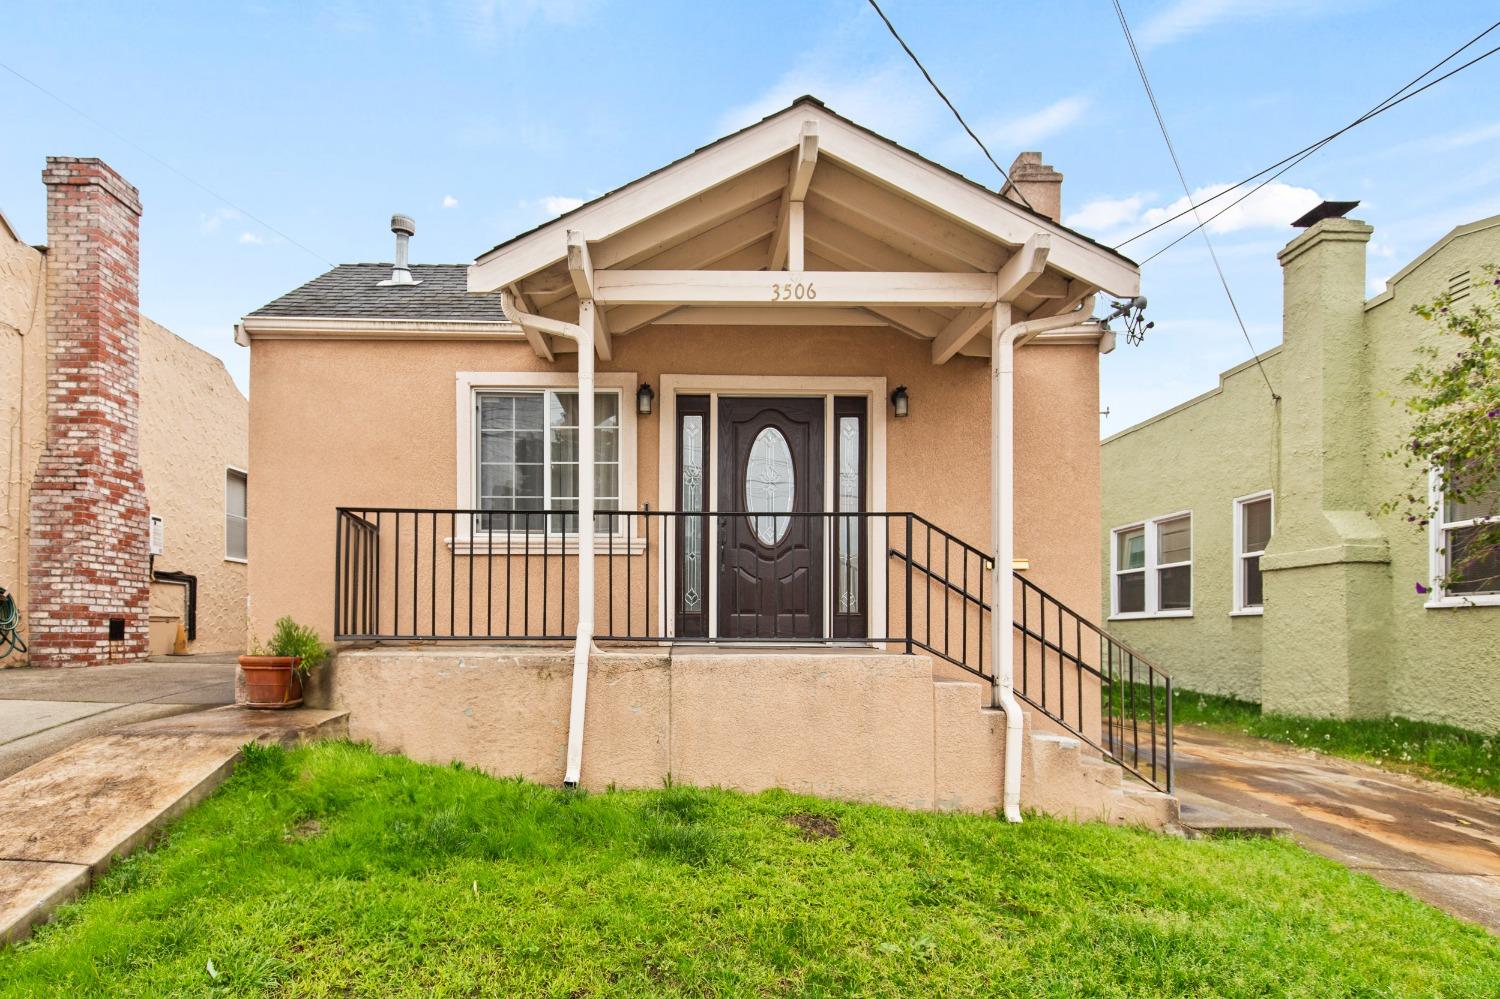 Photo of 3506 69th Ave in Oakland, CA